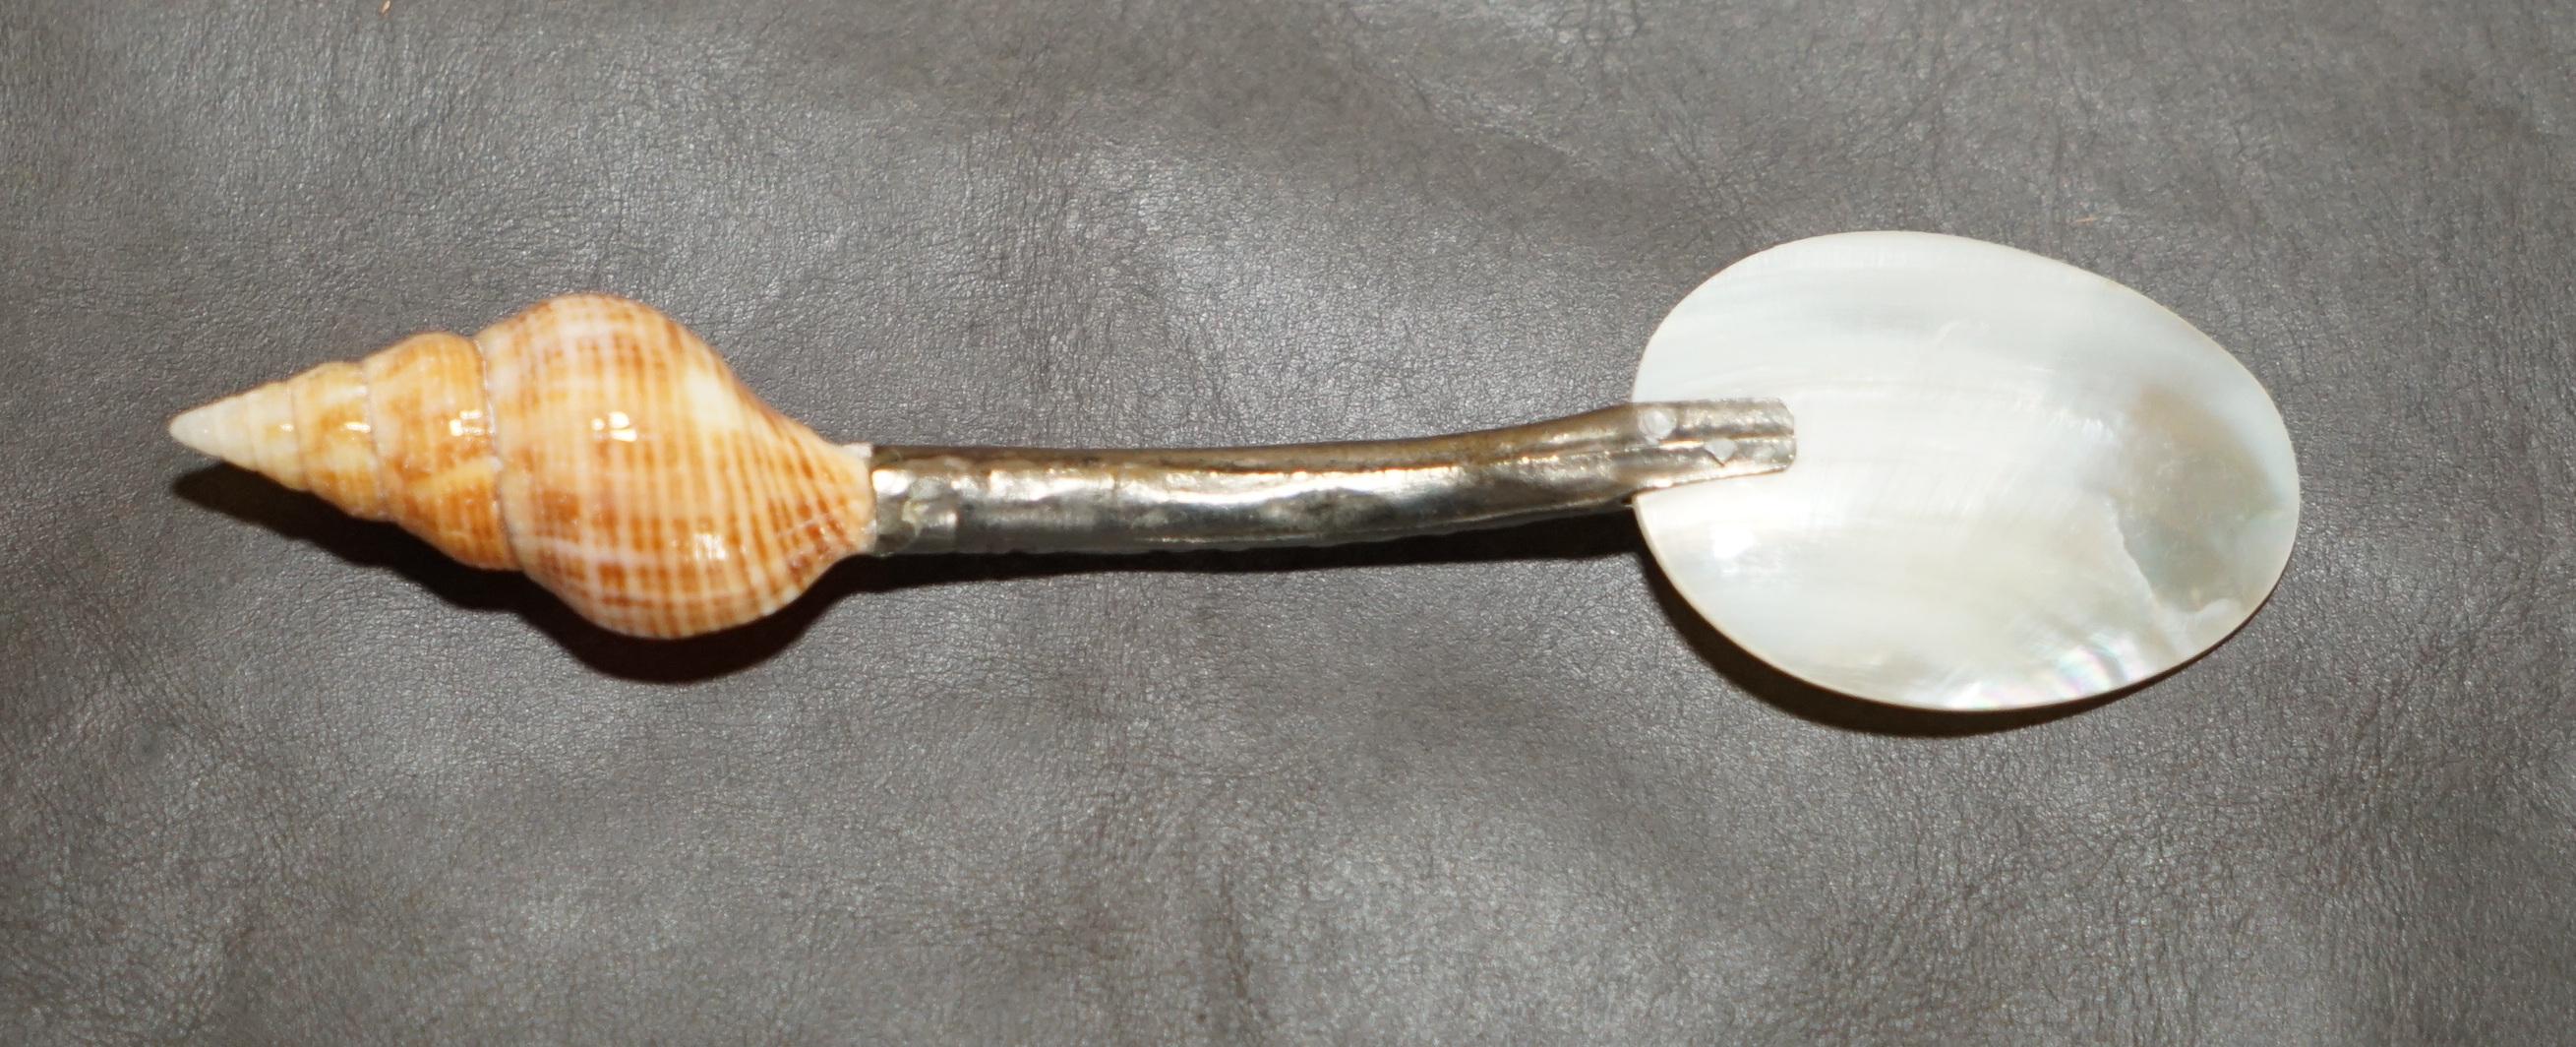 FOUR ANTIQUE ViCTORIAN MOTHER OF PEARL & STERLING SILVER TESTED SHELL TEA SPOONS For Sale 3